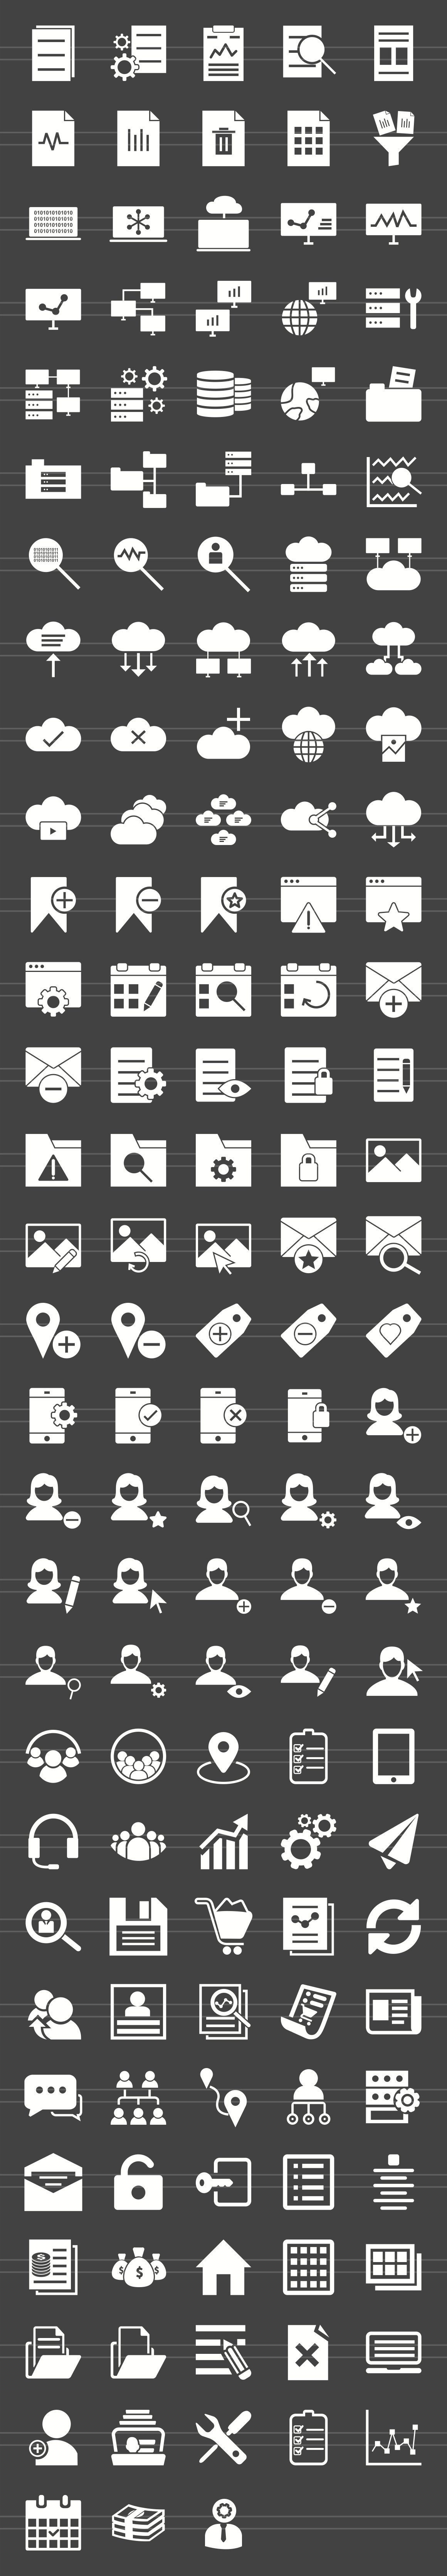 148 Admin Dashboard Glyph Icons preview image.